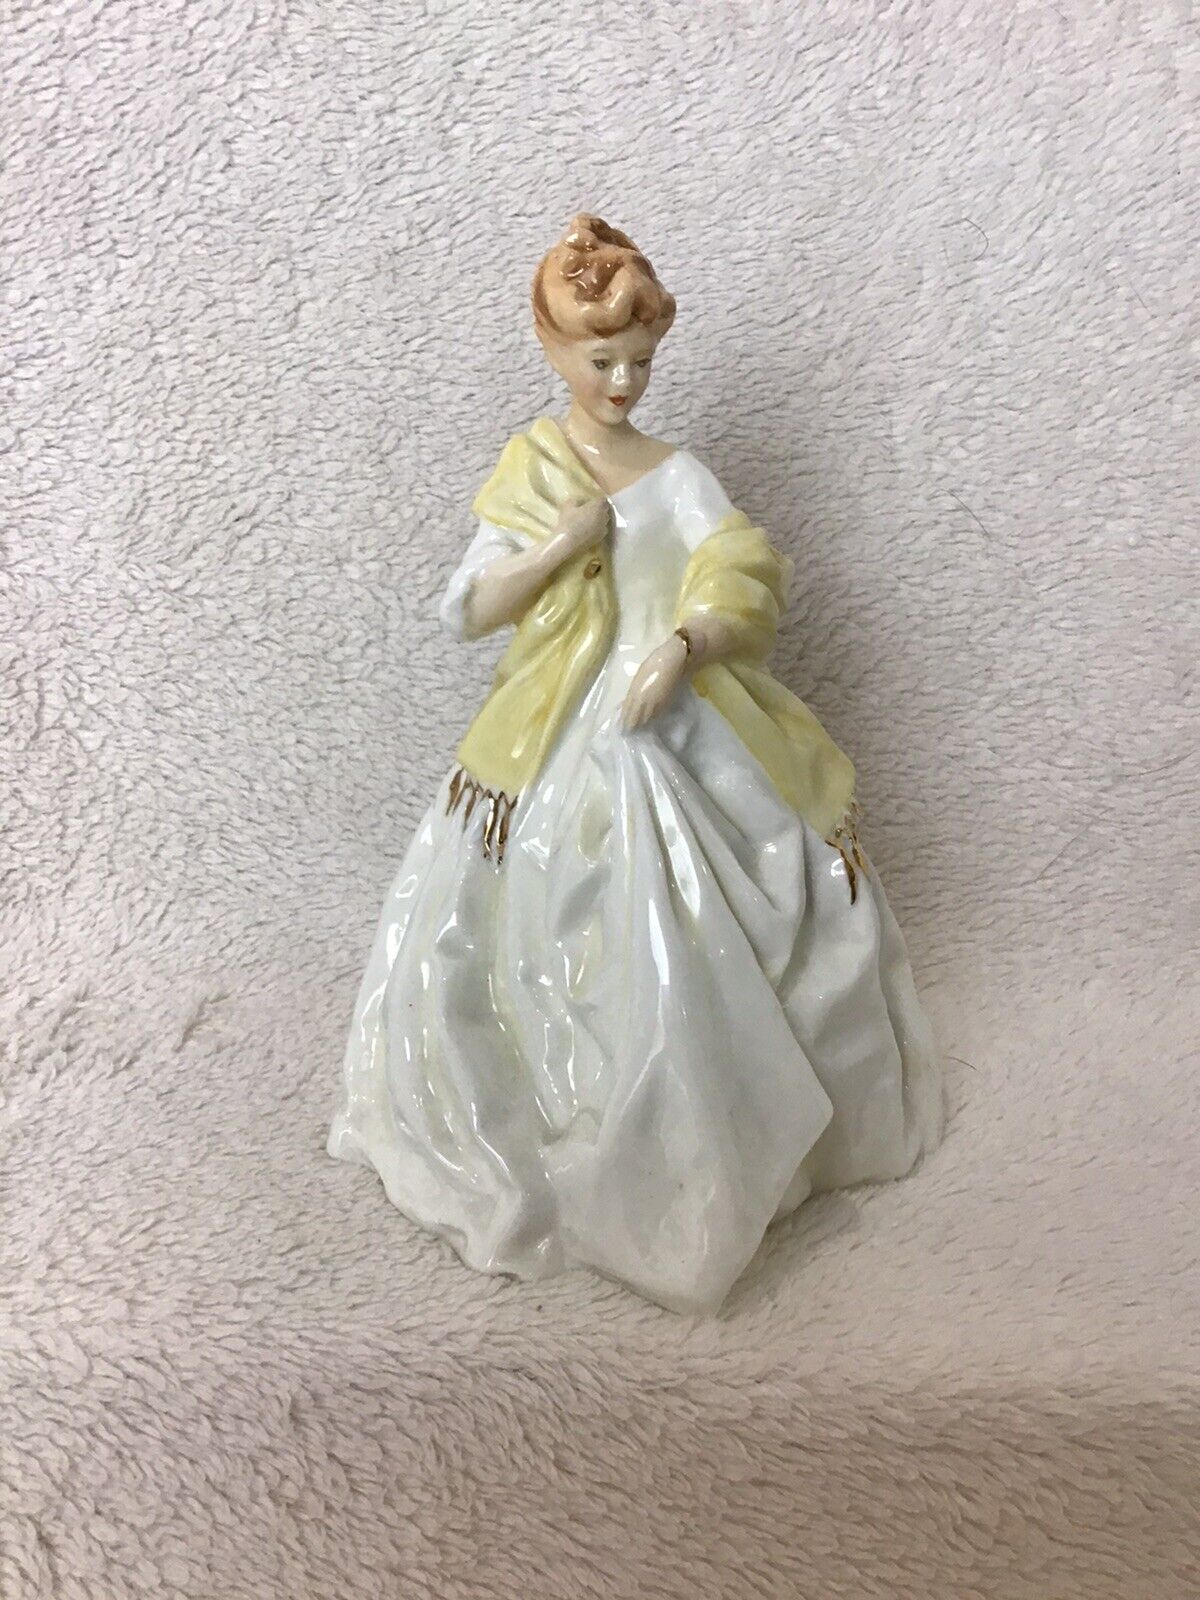 ROYAL WORCESTER PORCELAIN 3629 FIRST DANCE FIGURINE MODELLED BY FG DOUGHTY 